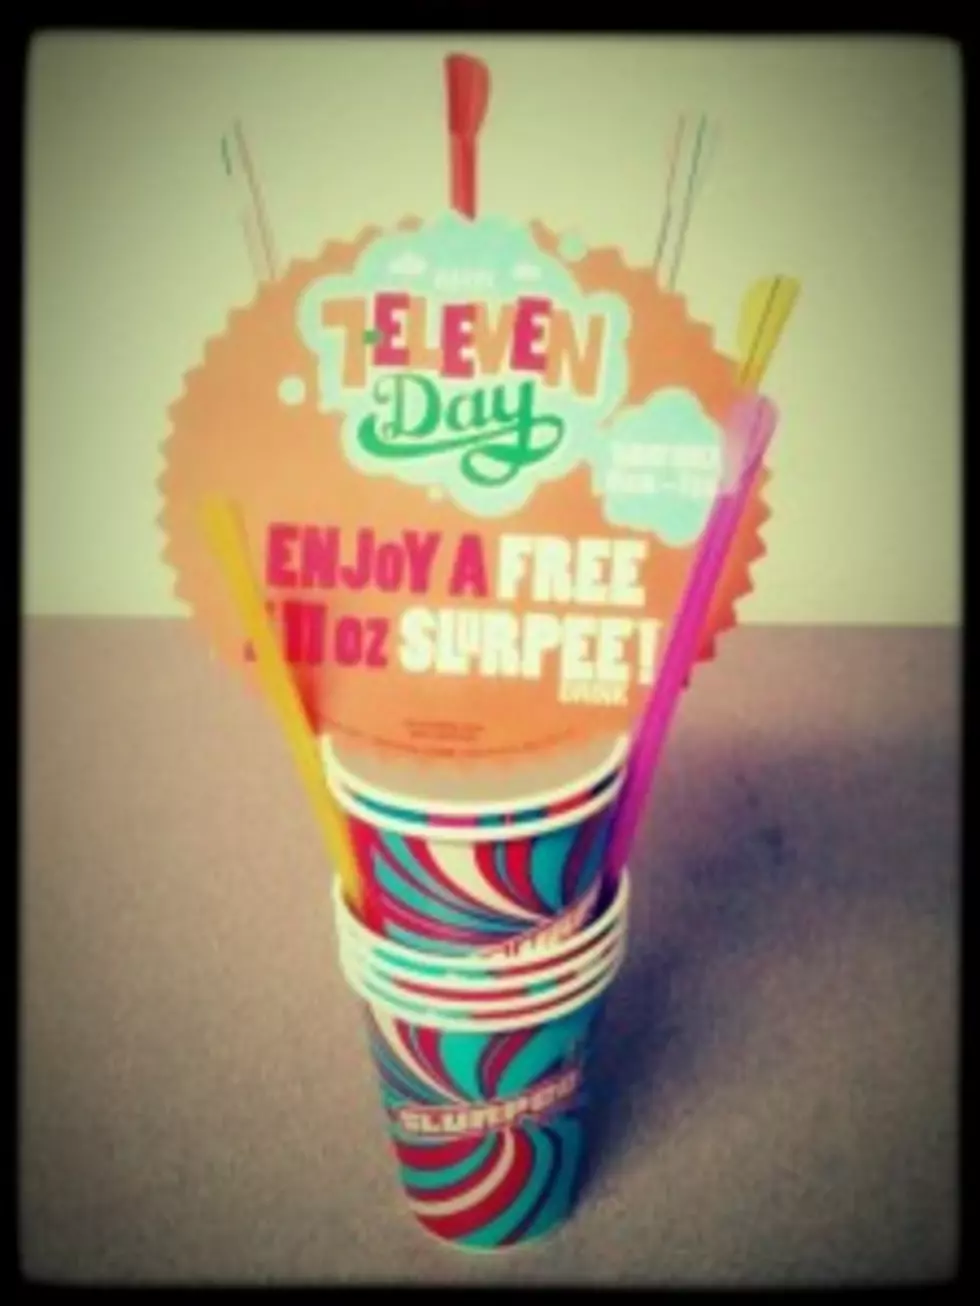 7-Eleven Day from the Slurpee Capital of the World